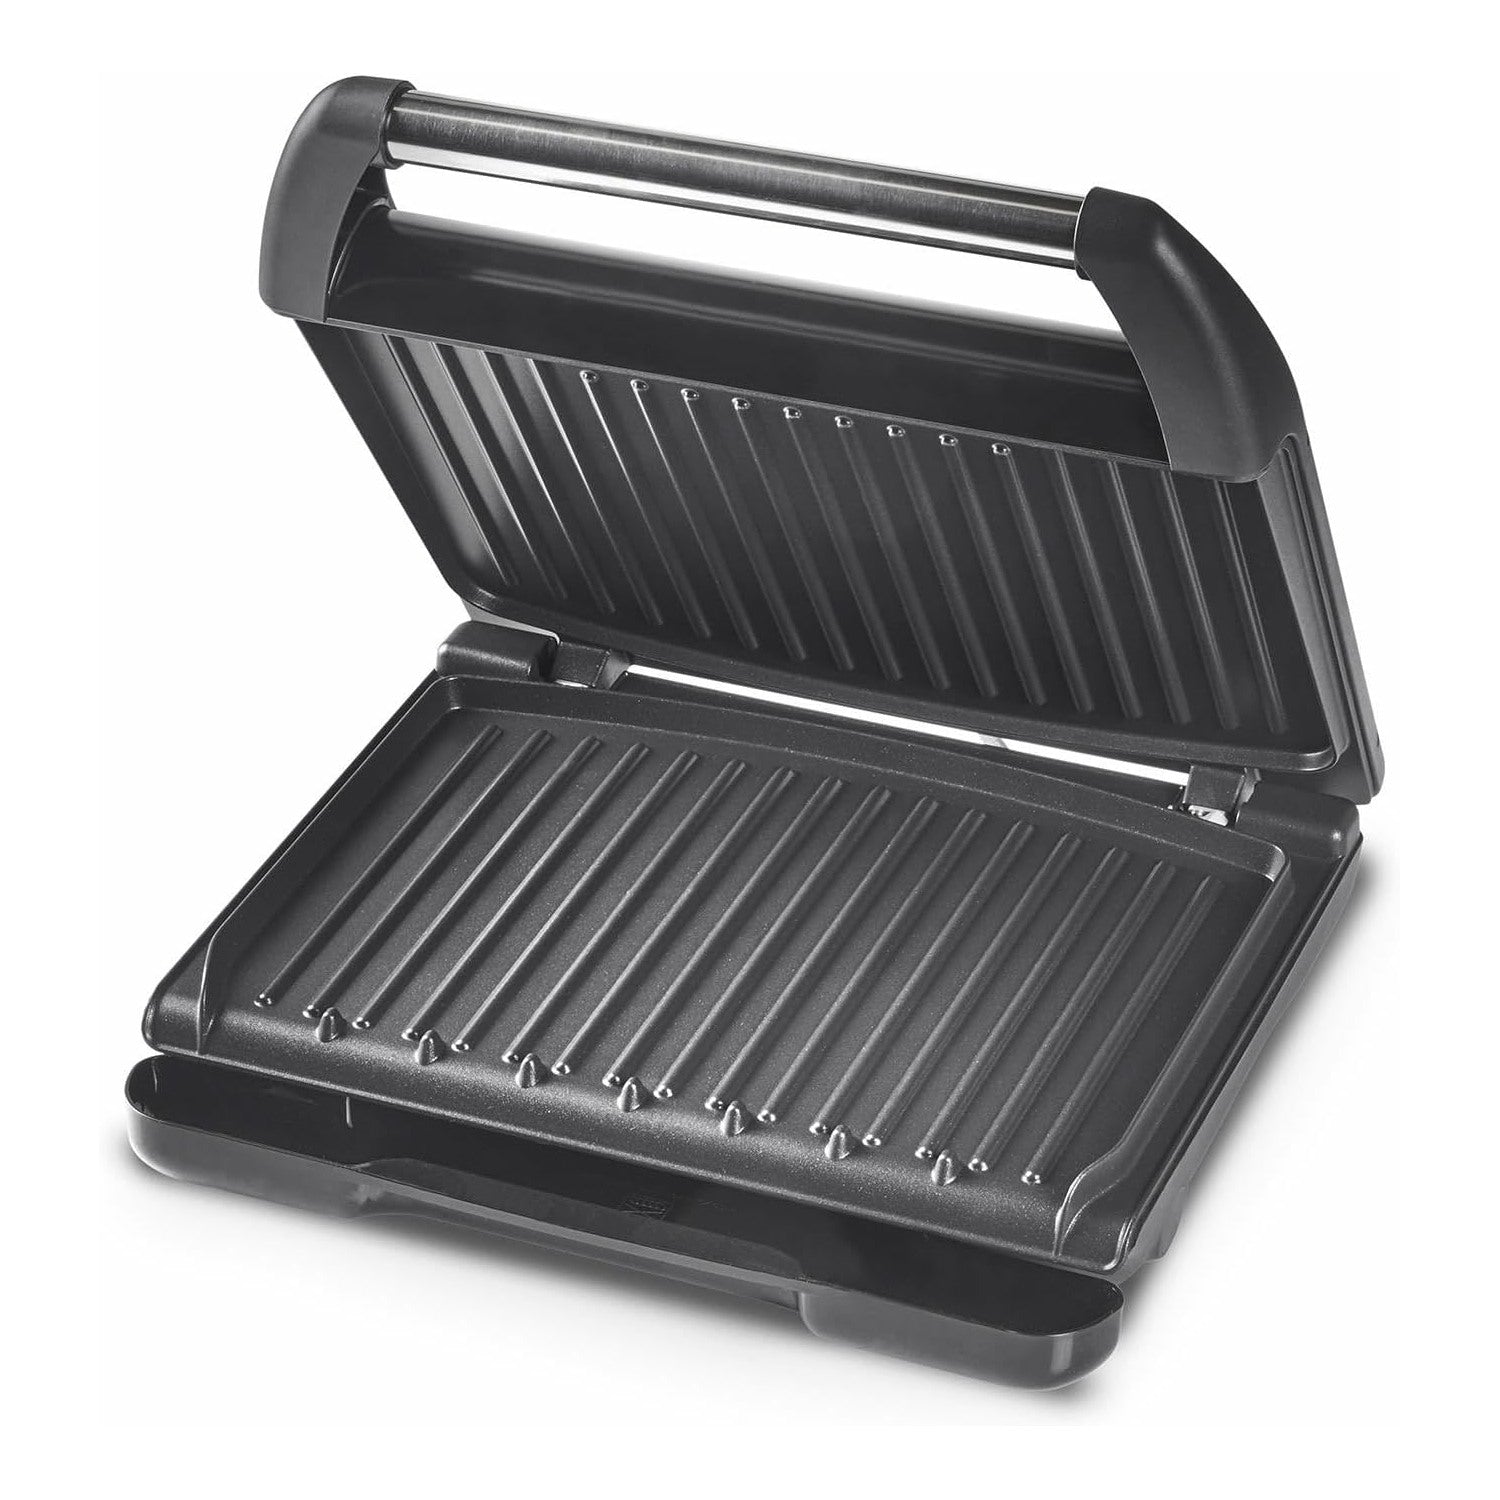 George Foreman Large Electric Health Grill